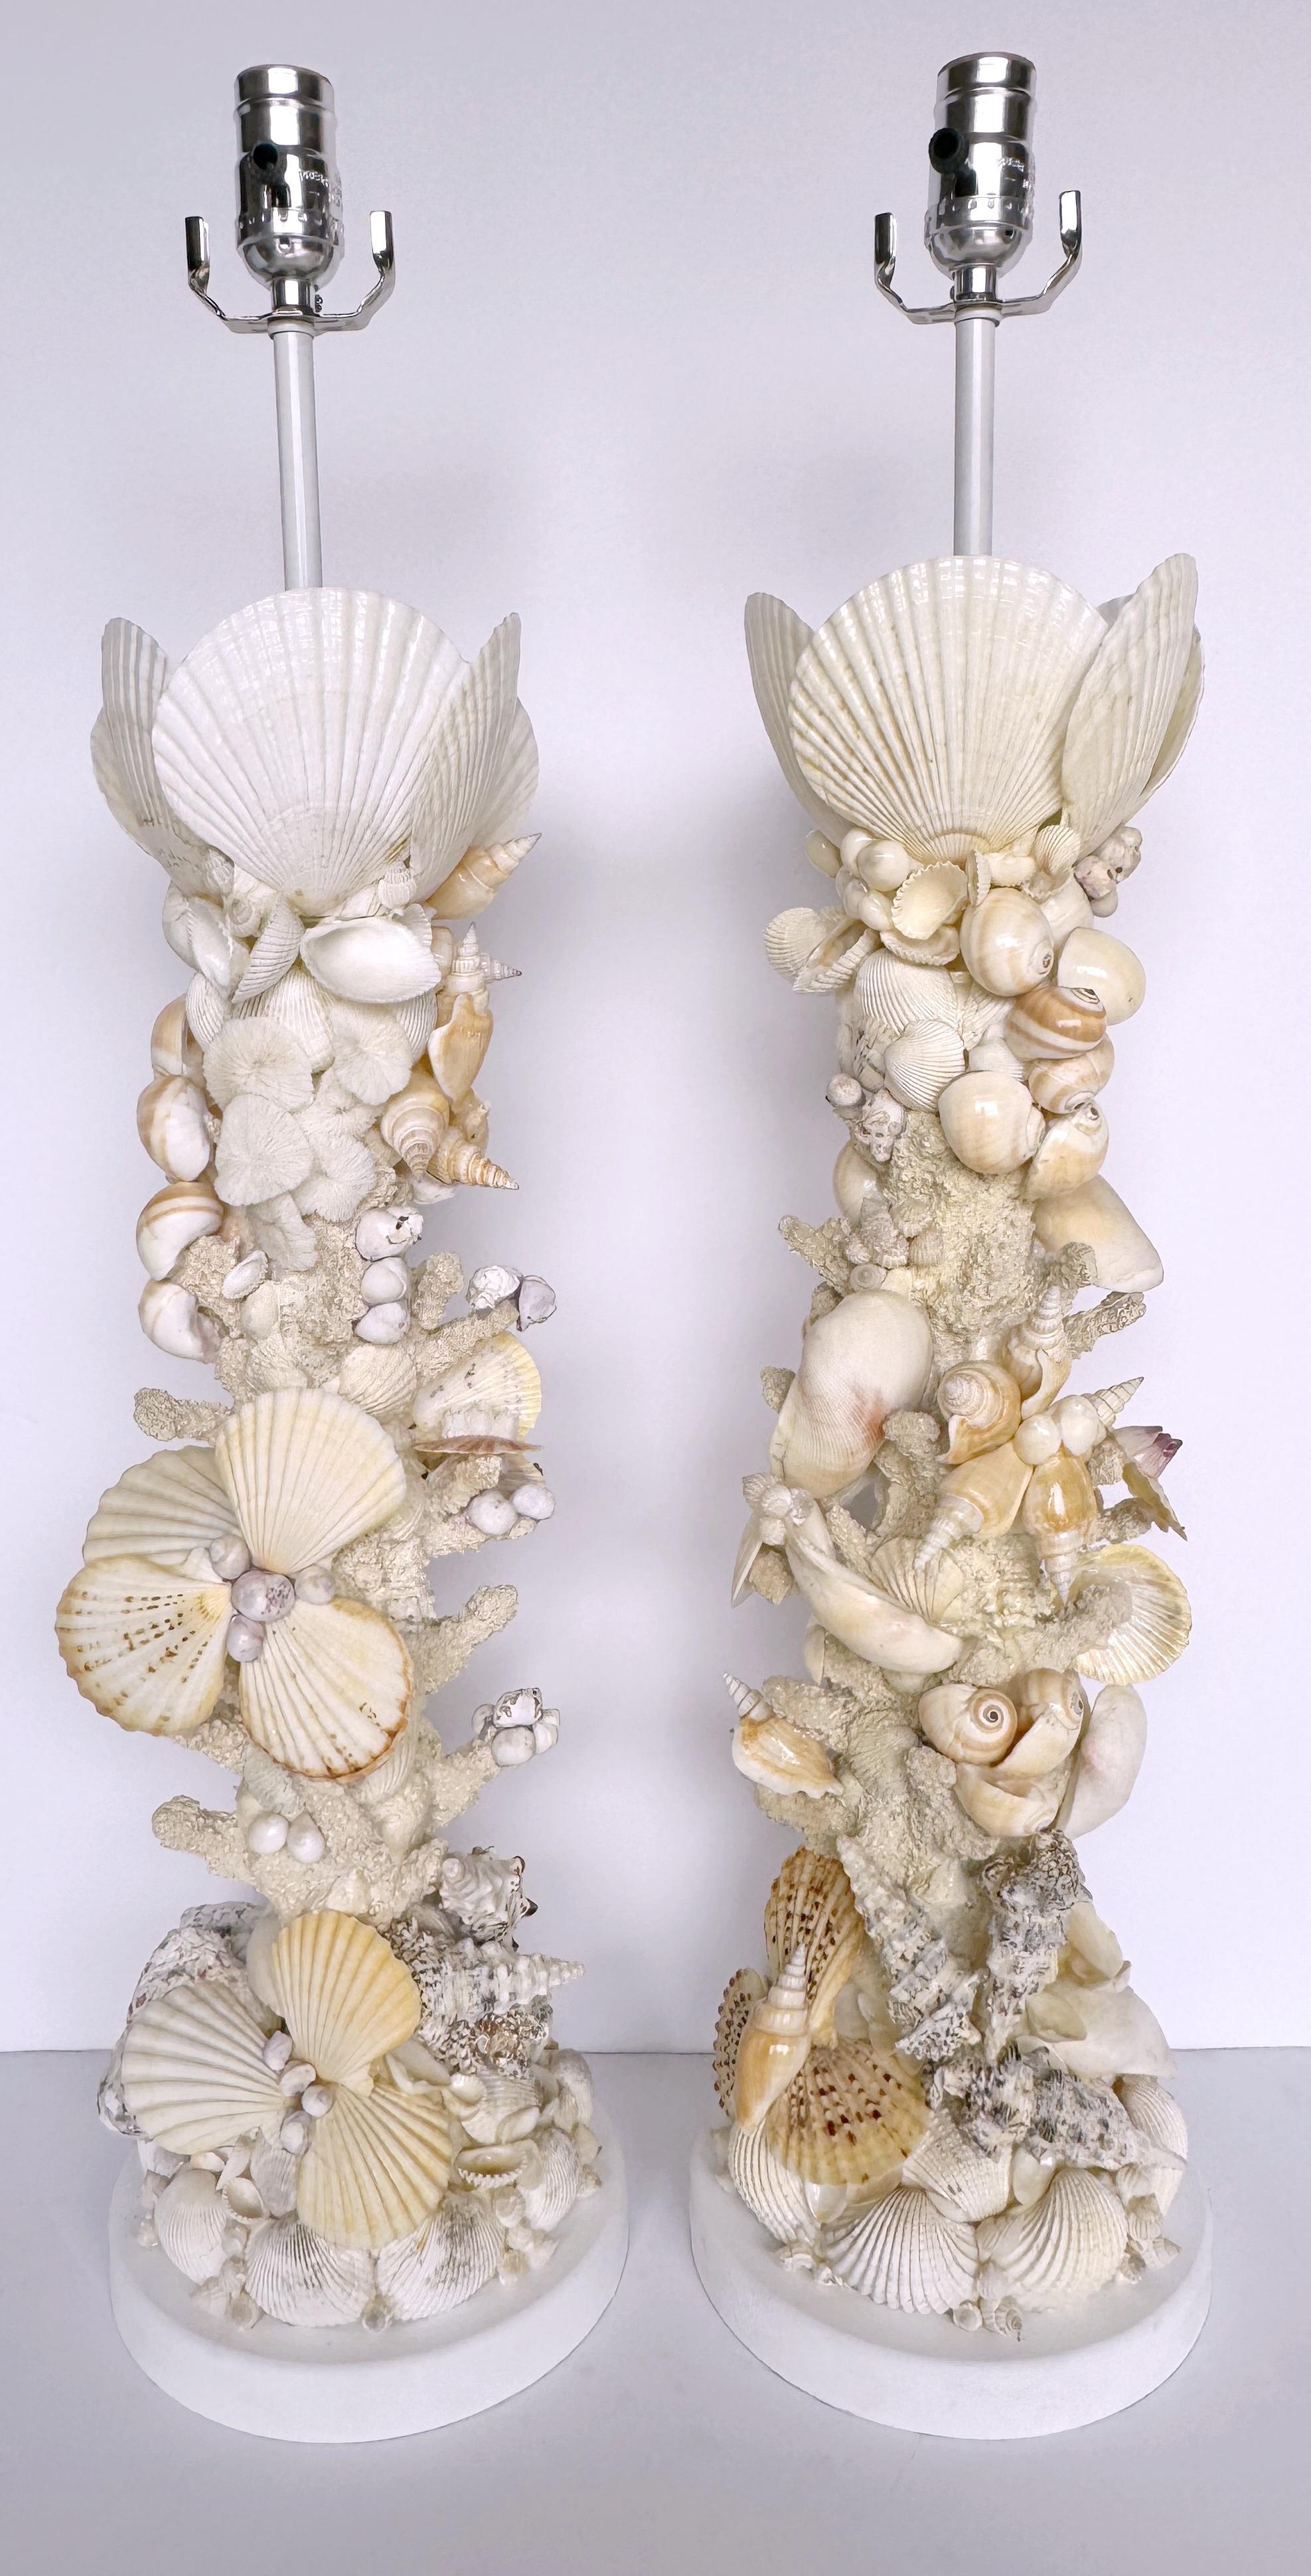 Pair of Tall Coastal Seashell Encrusted Column Lamps
USA, Later 20th Century 

A stunning pair of tall coastal seashell-encrusted column lamps. Made in the USA during the late 20th century, these lamps are a testament to organic seaside aesthetics